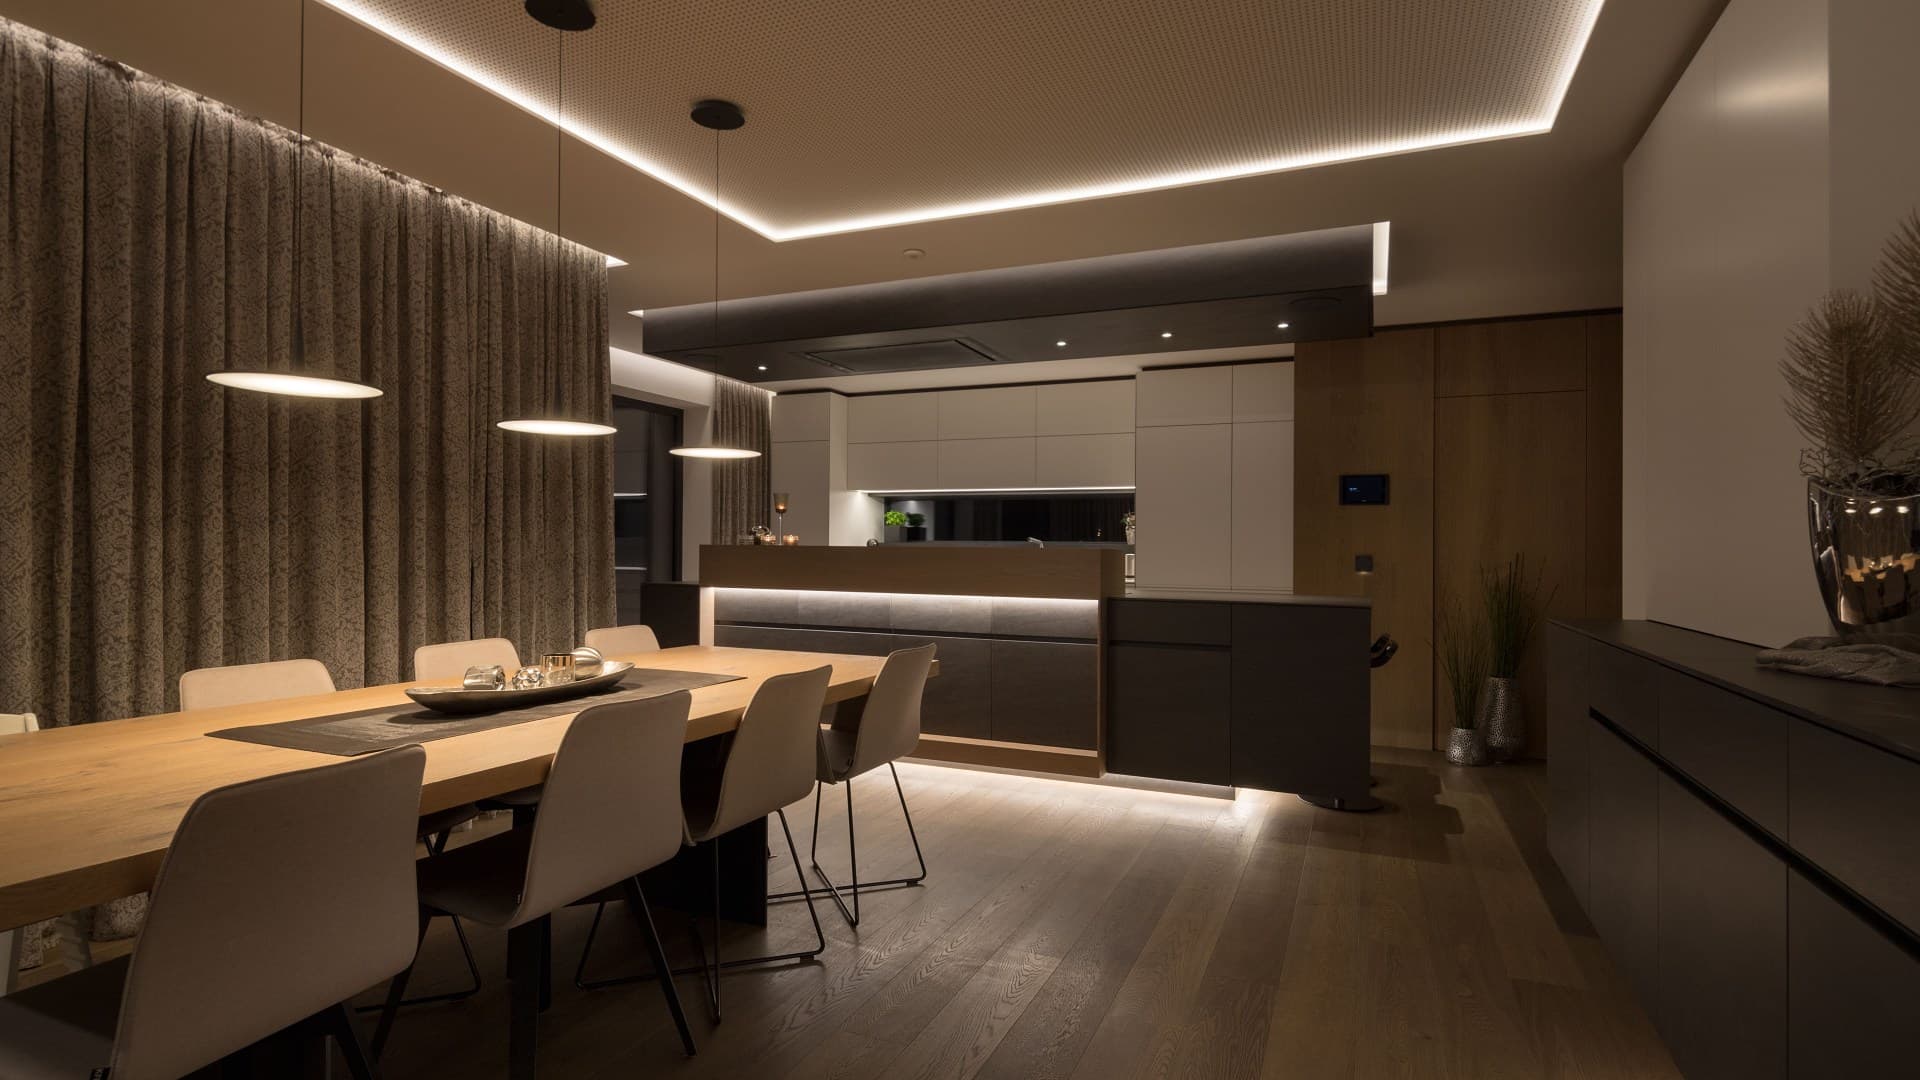 Lighting Design For Your Smart Home